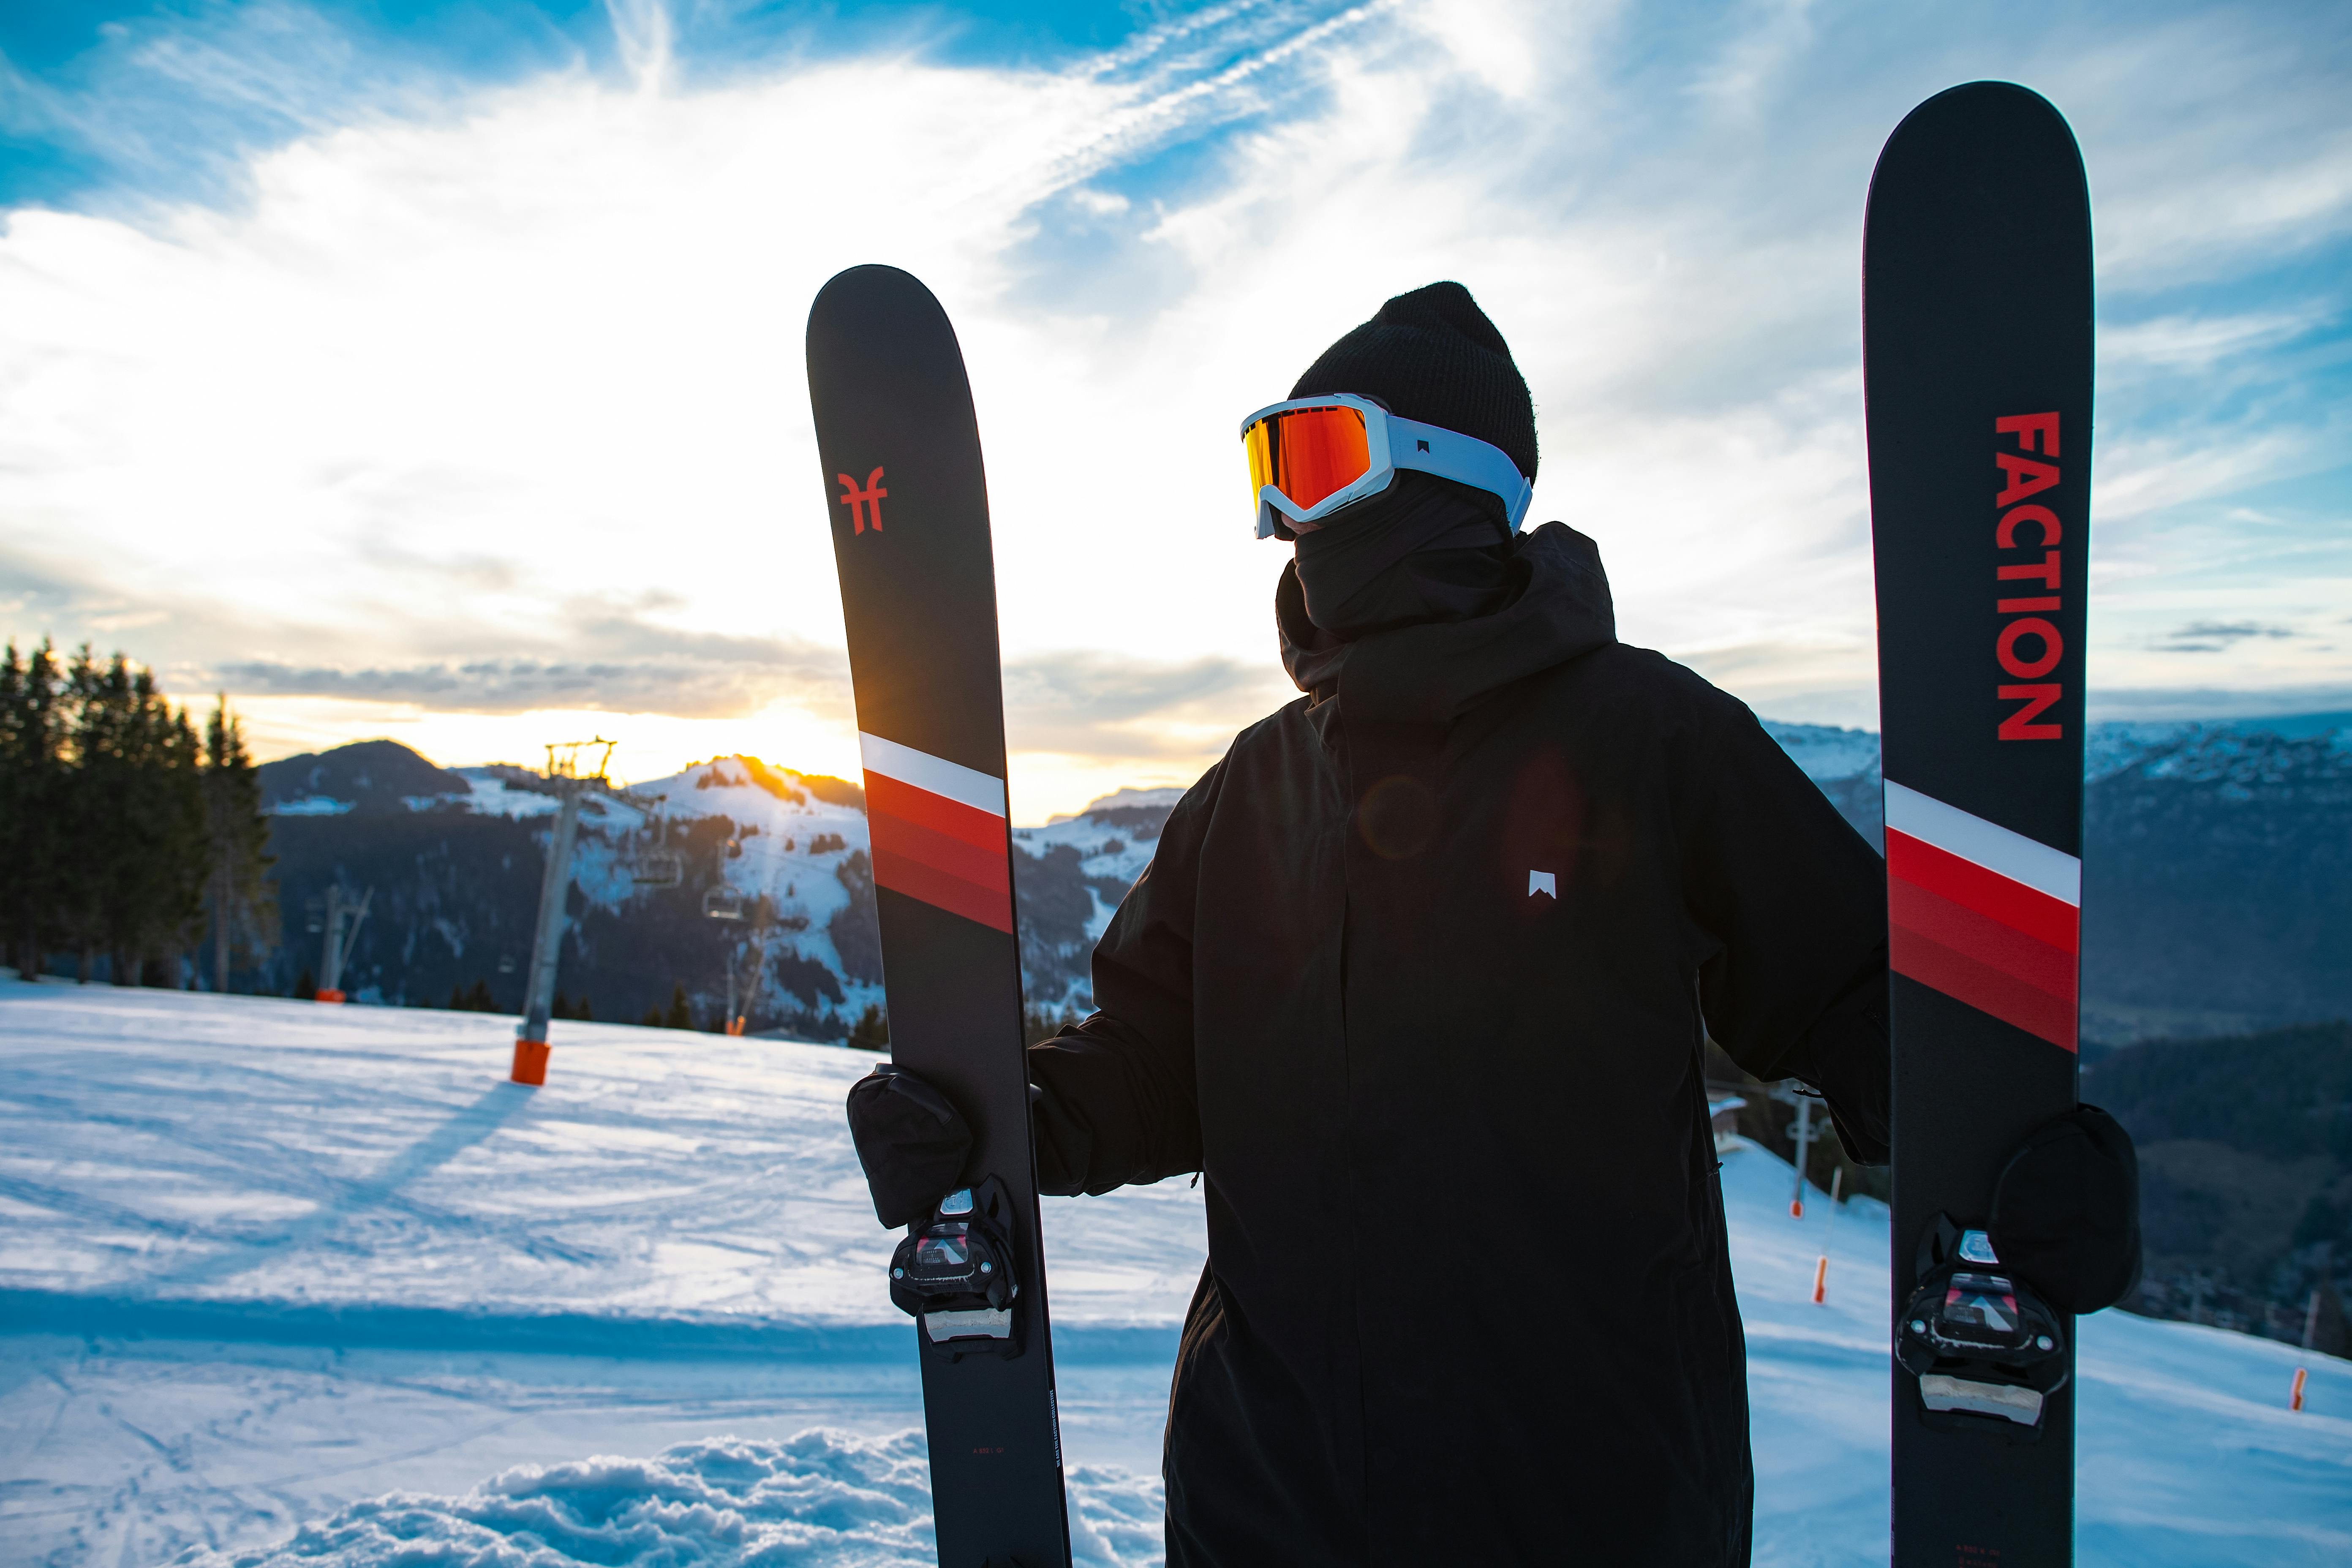 A man holding Faction skis on a slope with the sun setting in the background